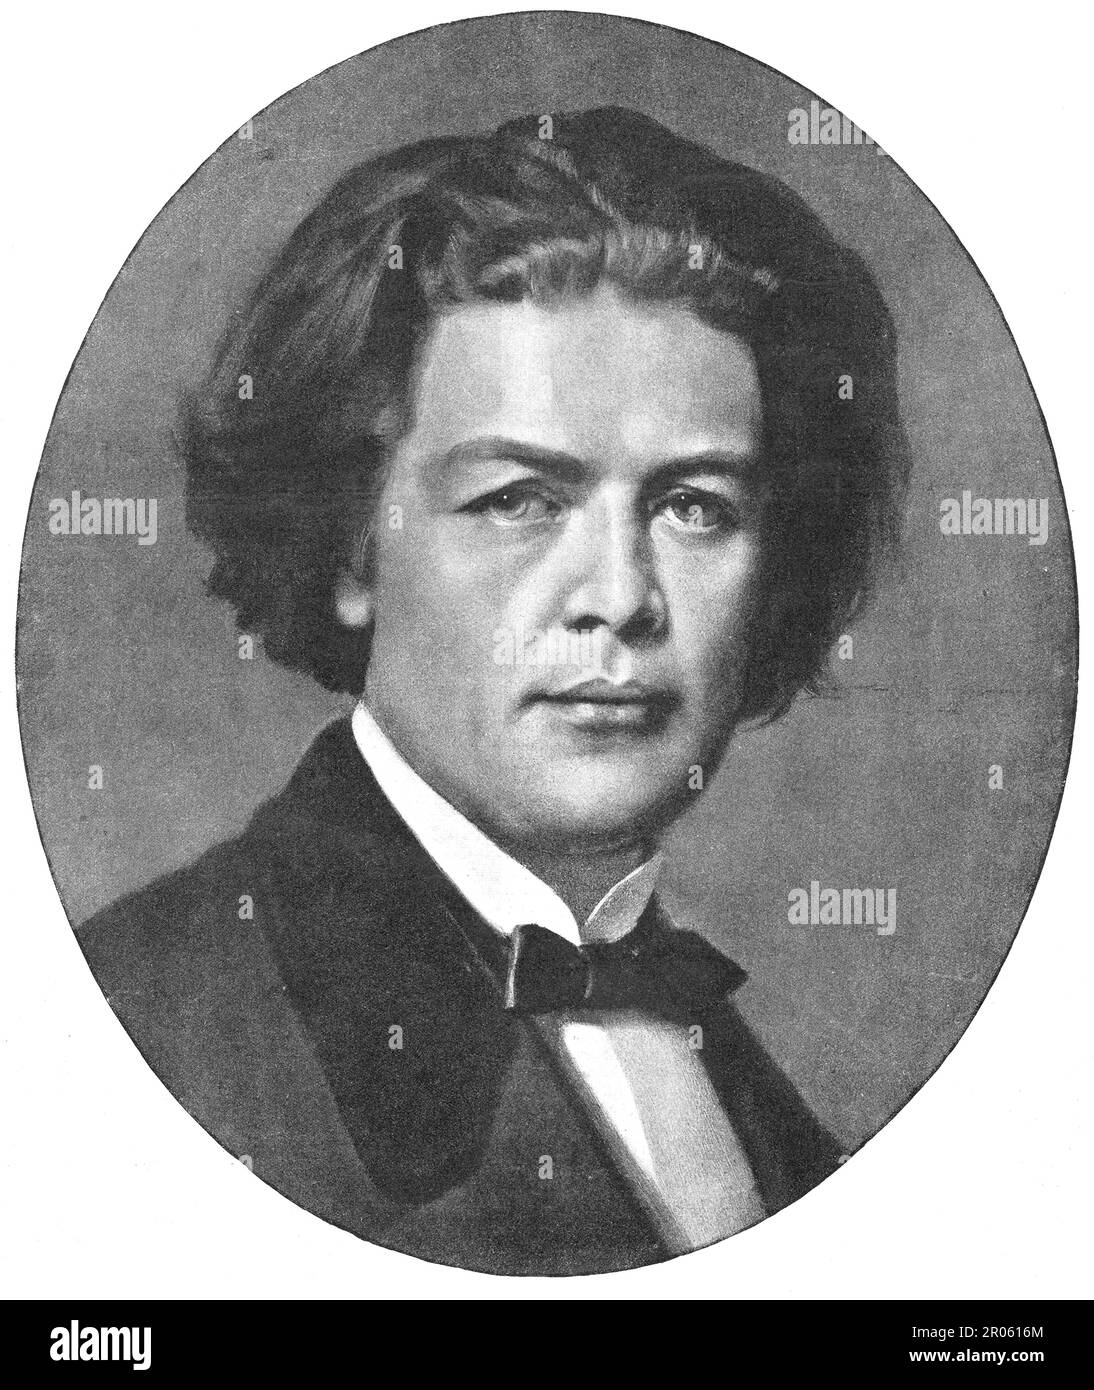 Anton Rubinstein. Anton Grigoryevich Rubinstein (1829 – 1894) was a Russian pianist, composer and conductor who became a pivotal figure in Russian culture when he founded the Saint Petersburg Conservatory. He was the elder brother of Nikolai Rubinstein, who founded the Moscow Conservatory. Stock Photo